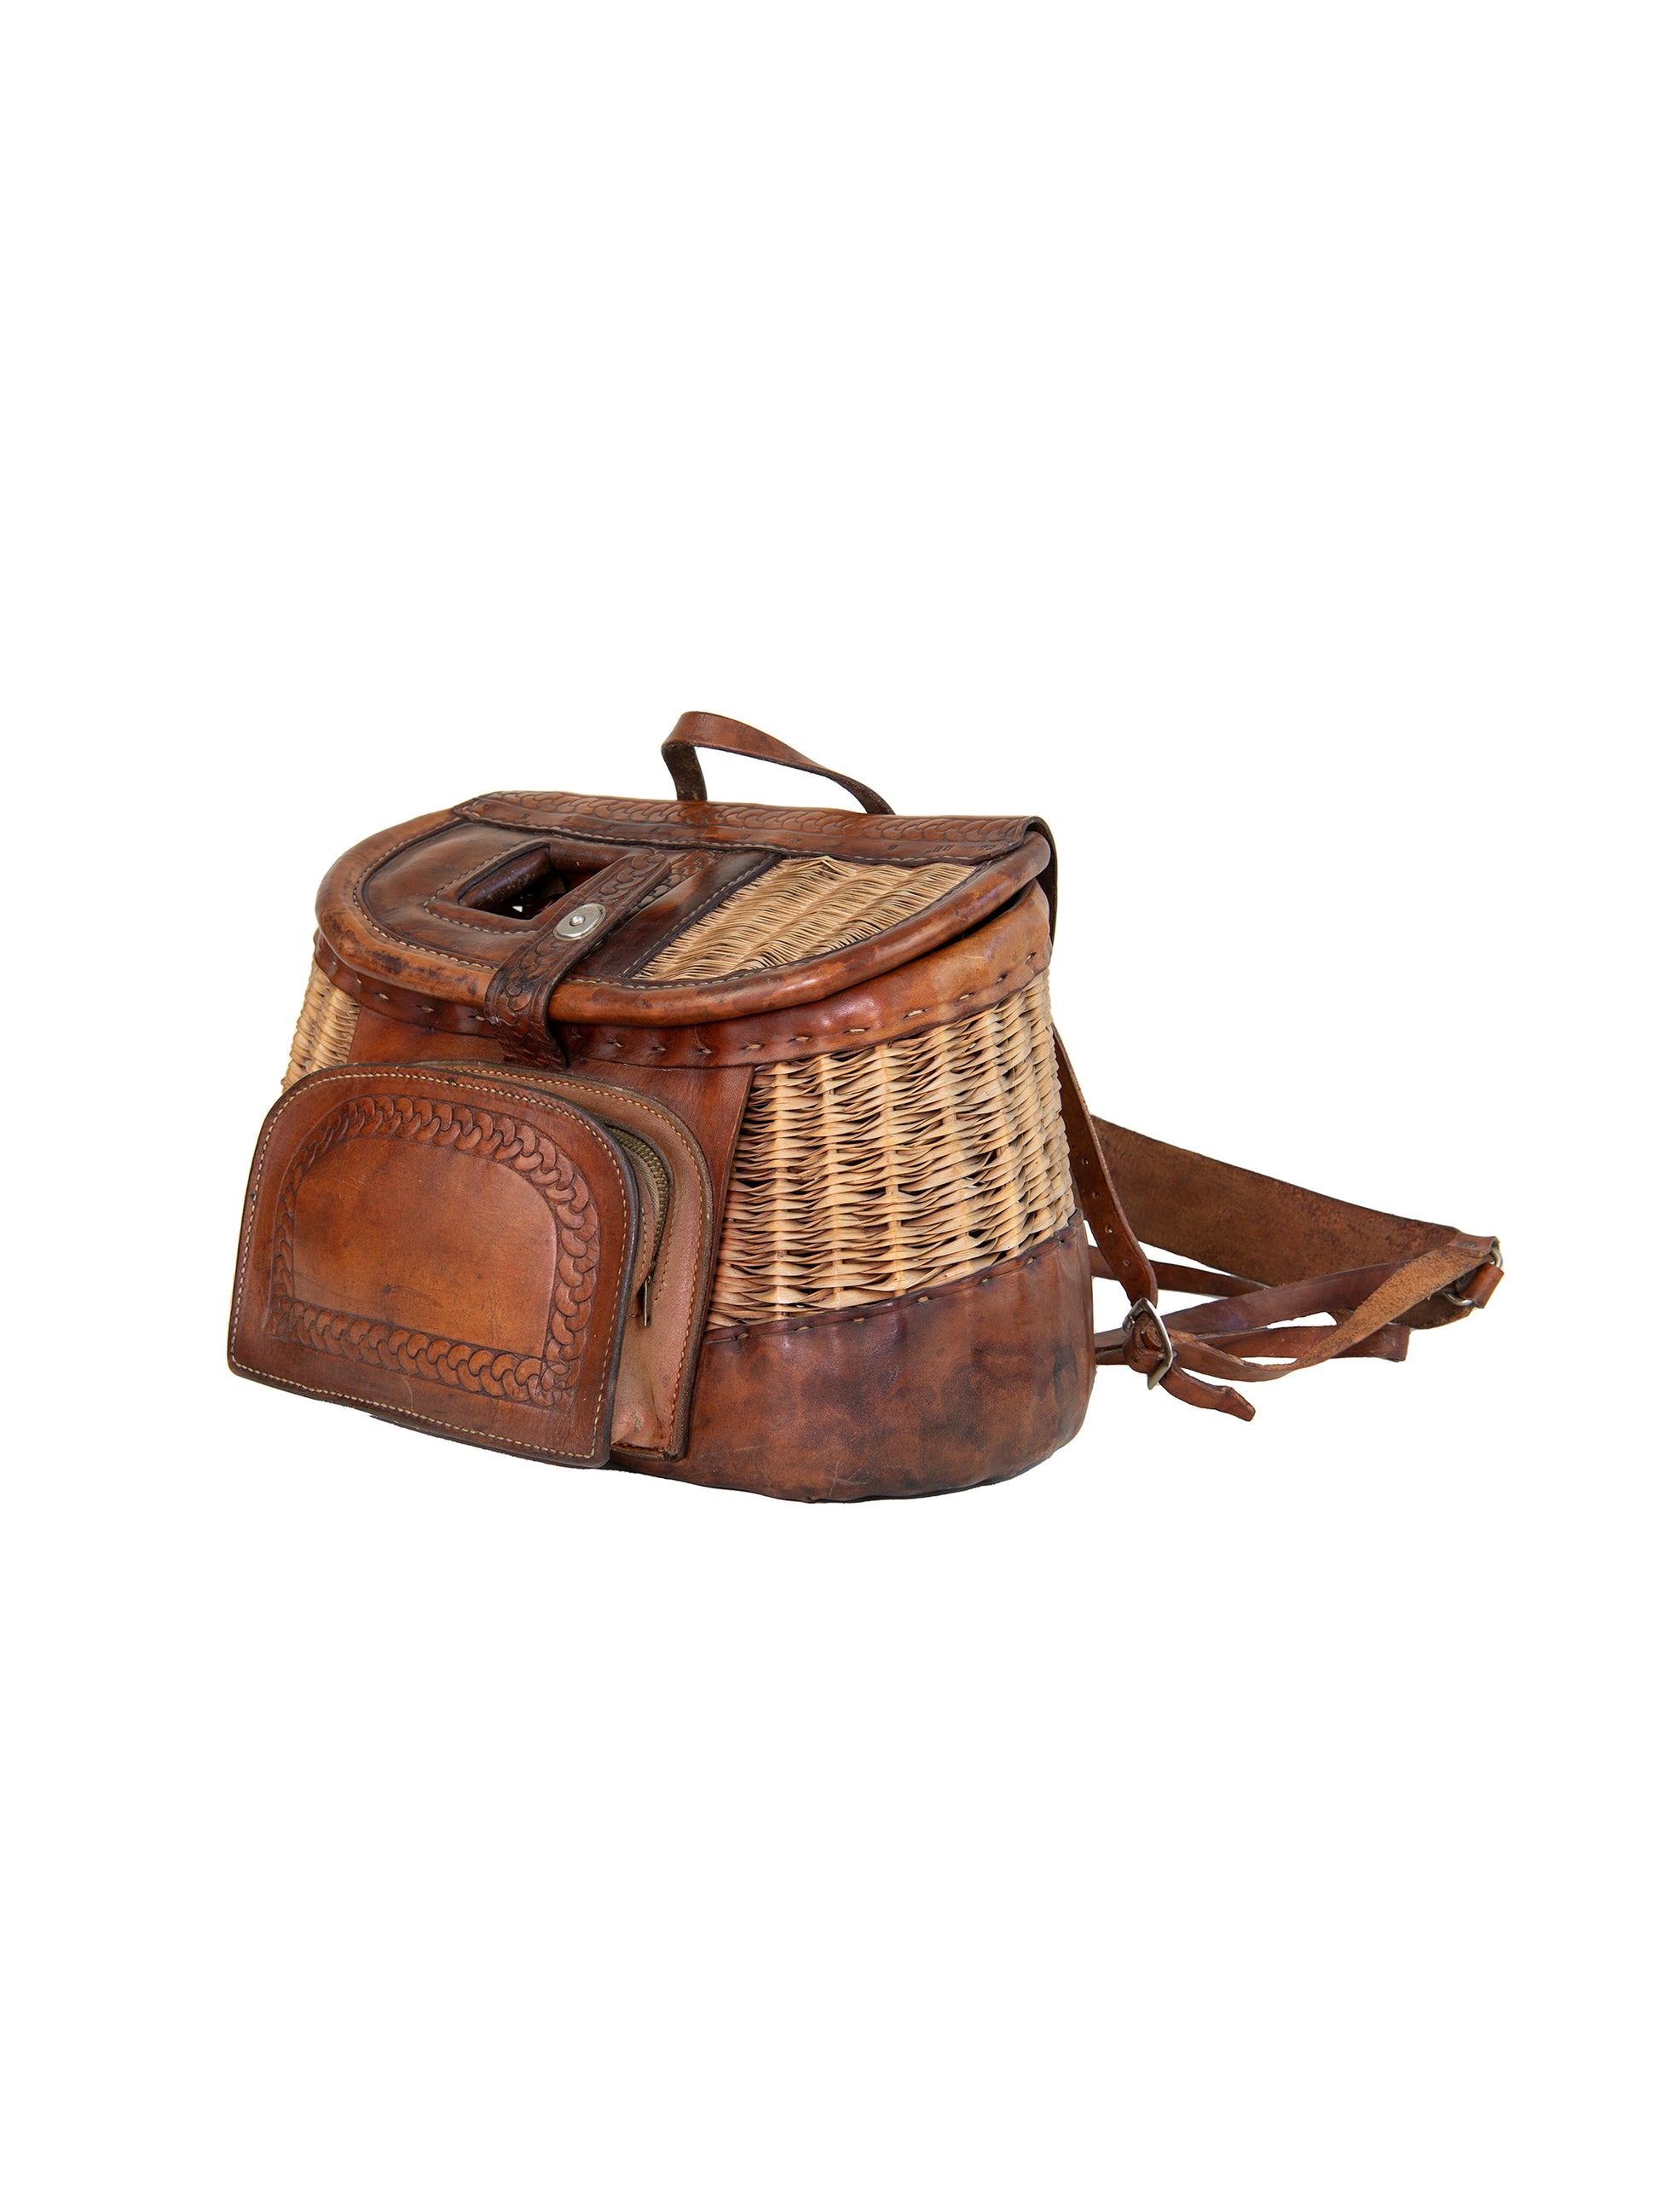 Similar Items to Vintage Beautiful Leather Trim Classic Fishing Creel